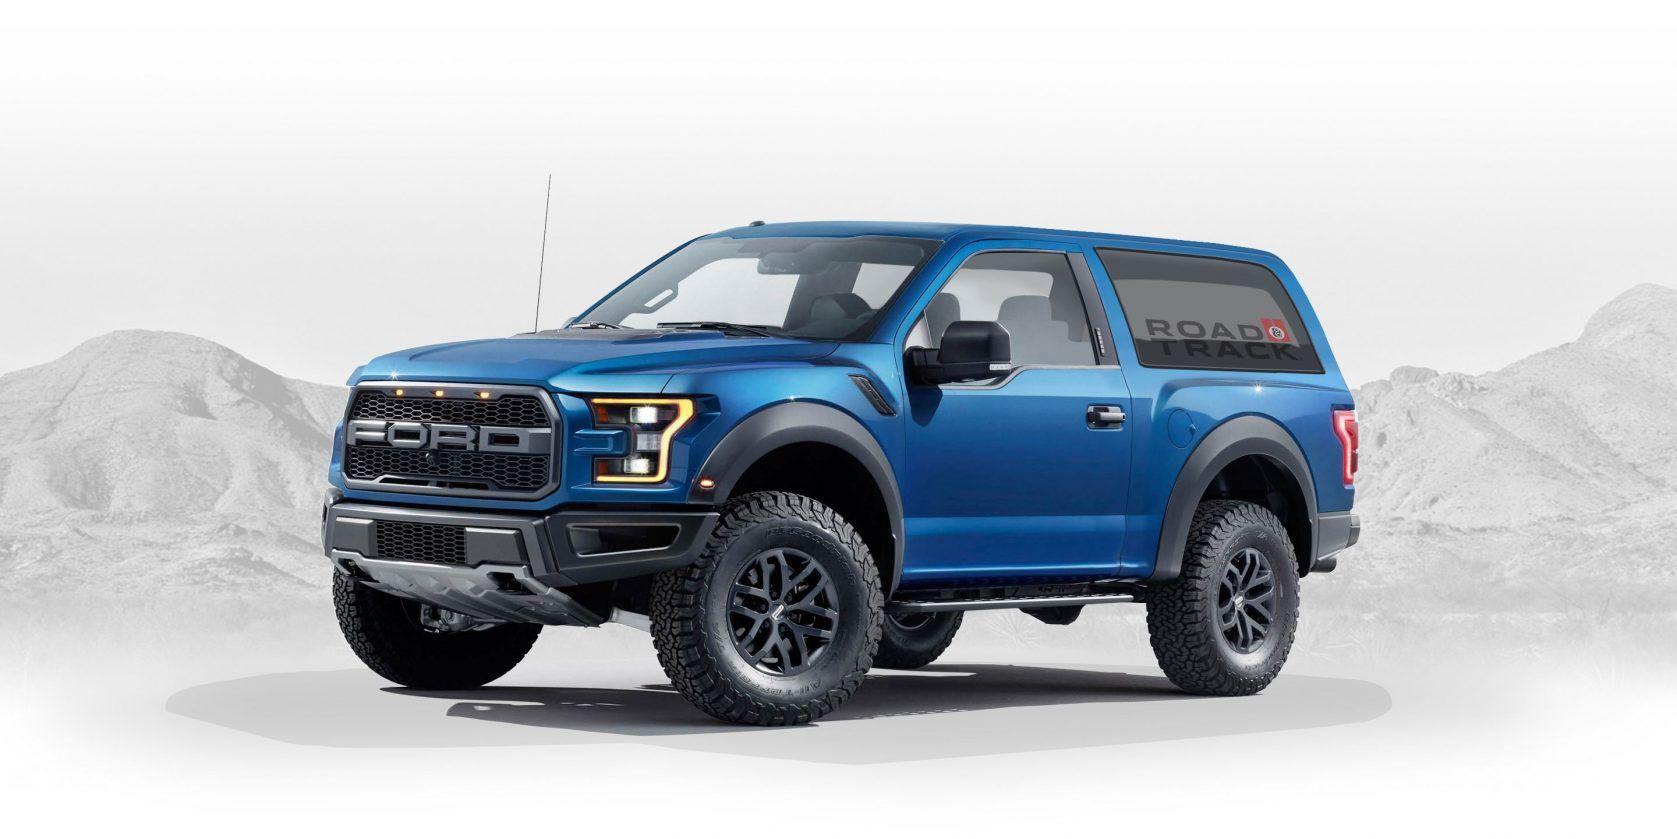 New 2020 Ford Bronco Look HD Wallpaper. Best New Car